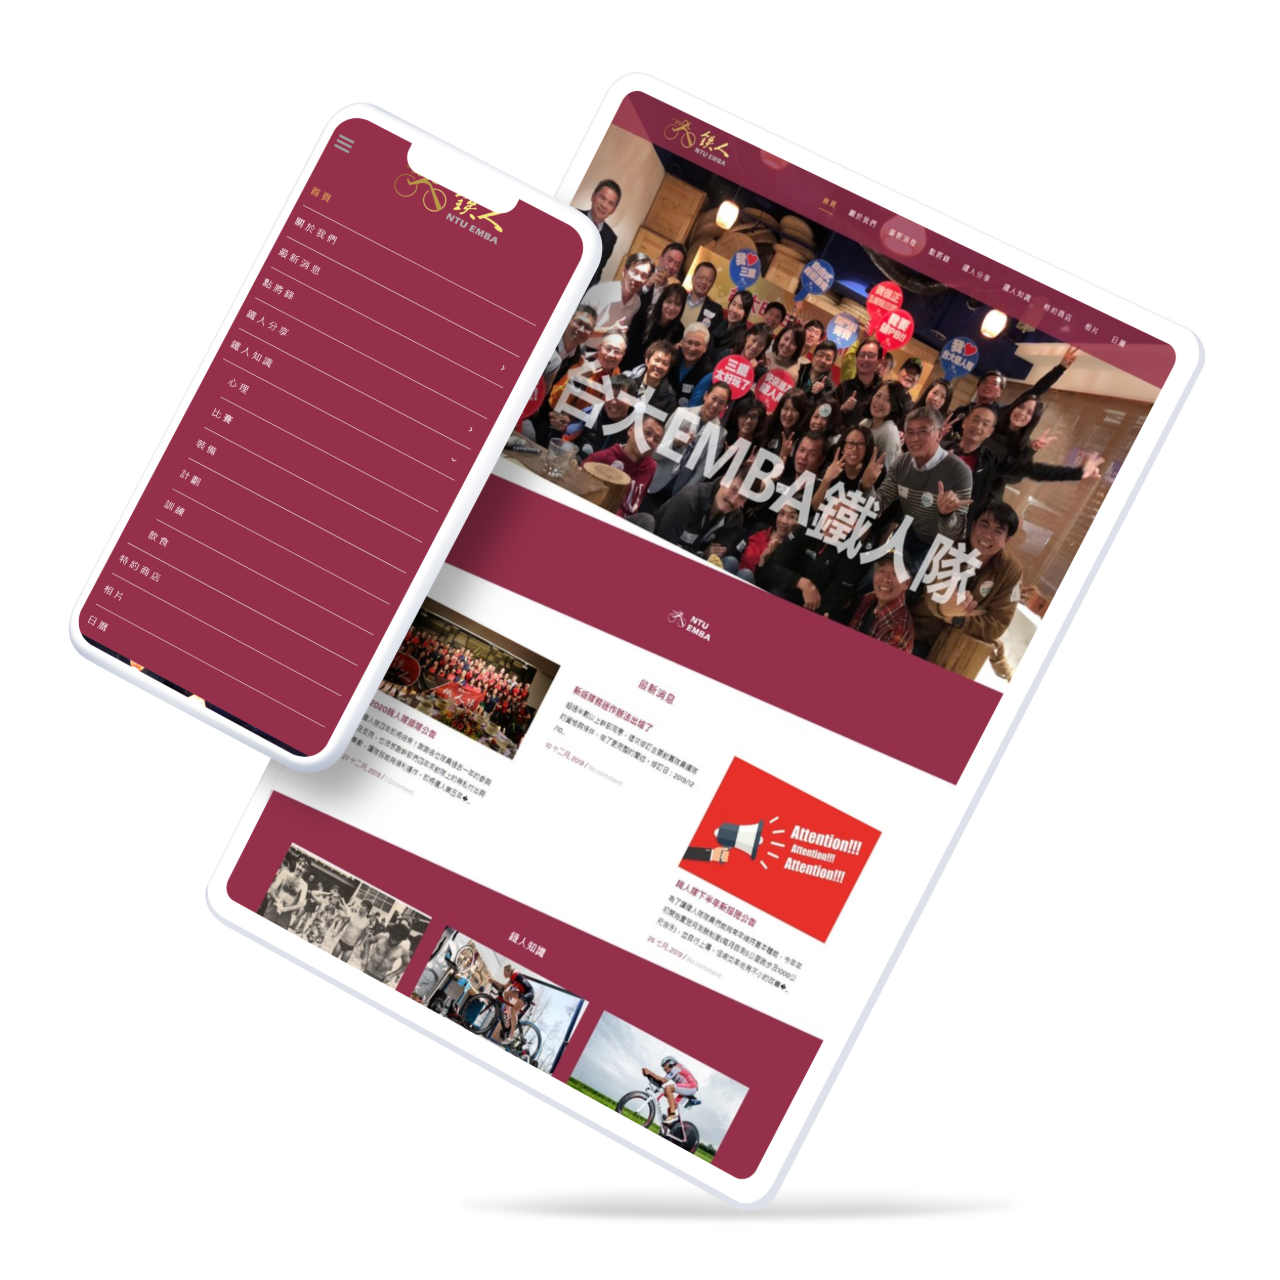 Triathlon @ NTUEMBA - Home  Mobile Menu - Sports club branding website for records. Creation integrates a triathlon theme, emphasizing the concept of uphill climbs and sprints!